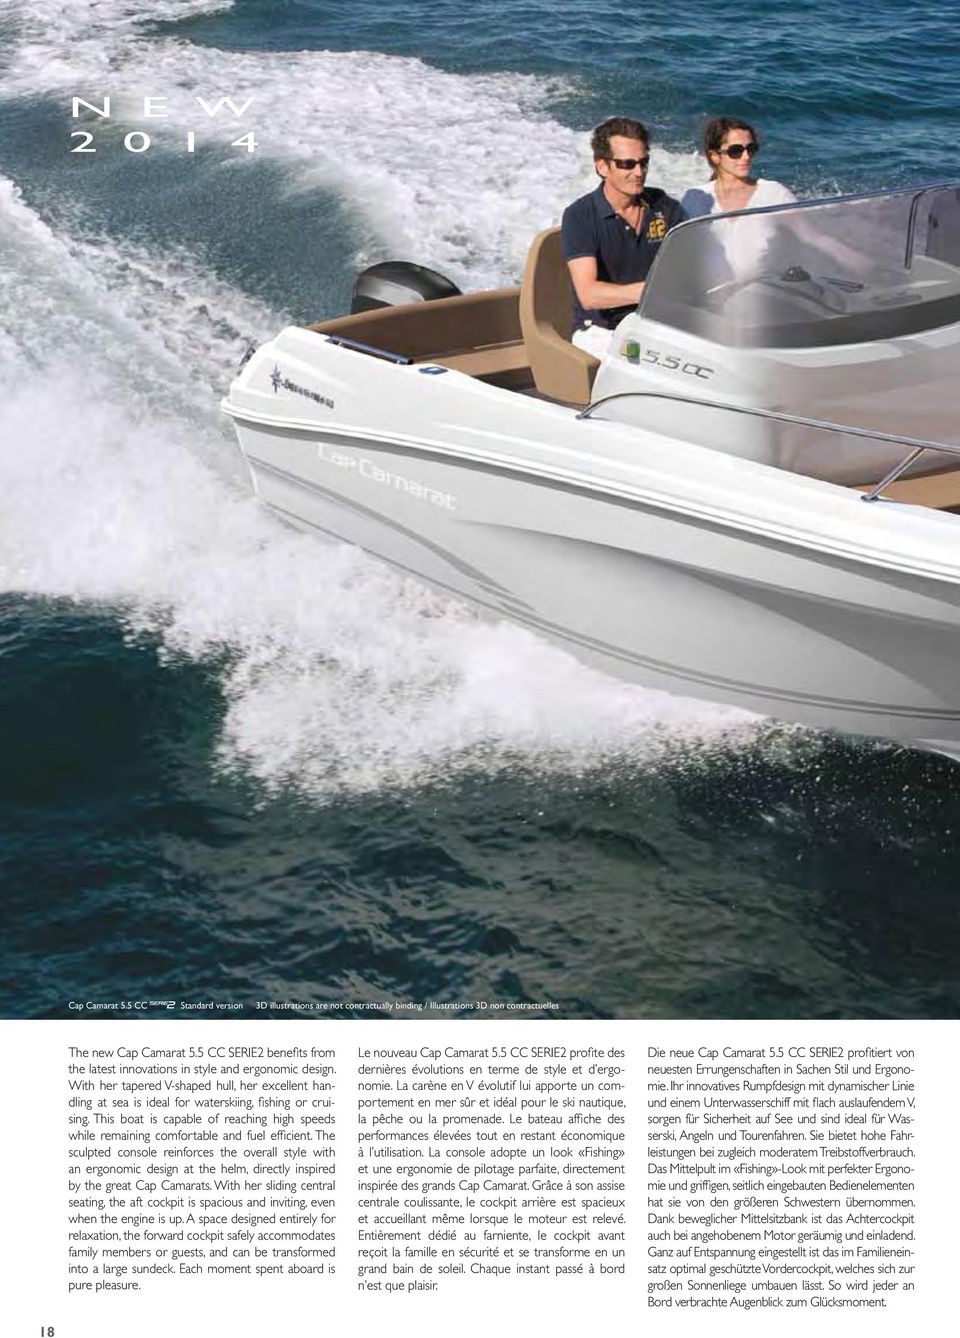 This boat is capable of reaching high speeds while remaining comfortable and fuel efficient.